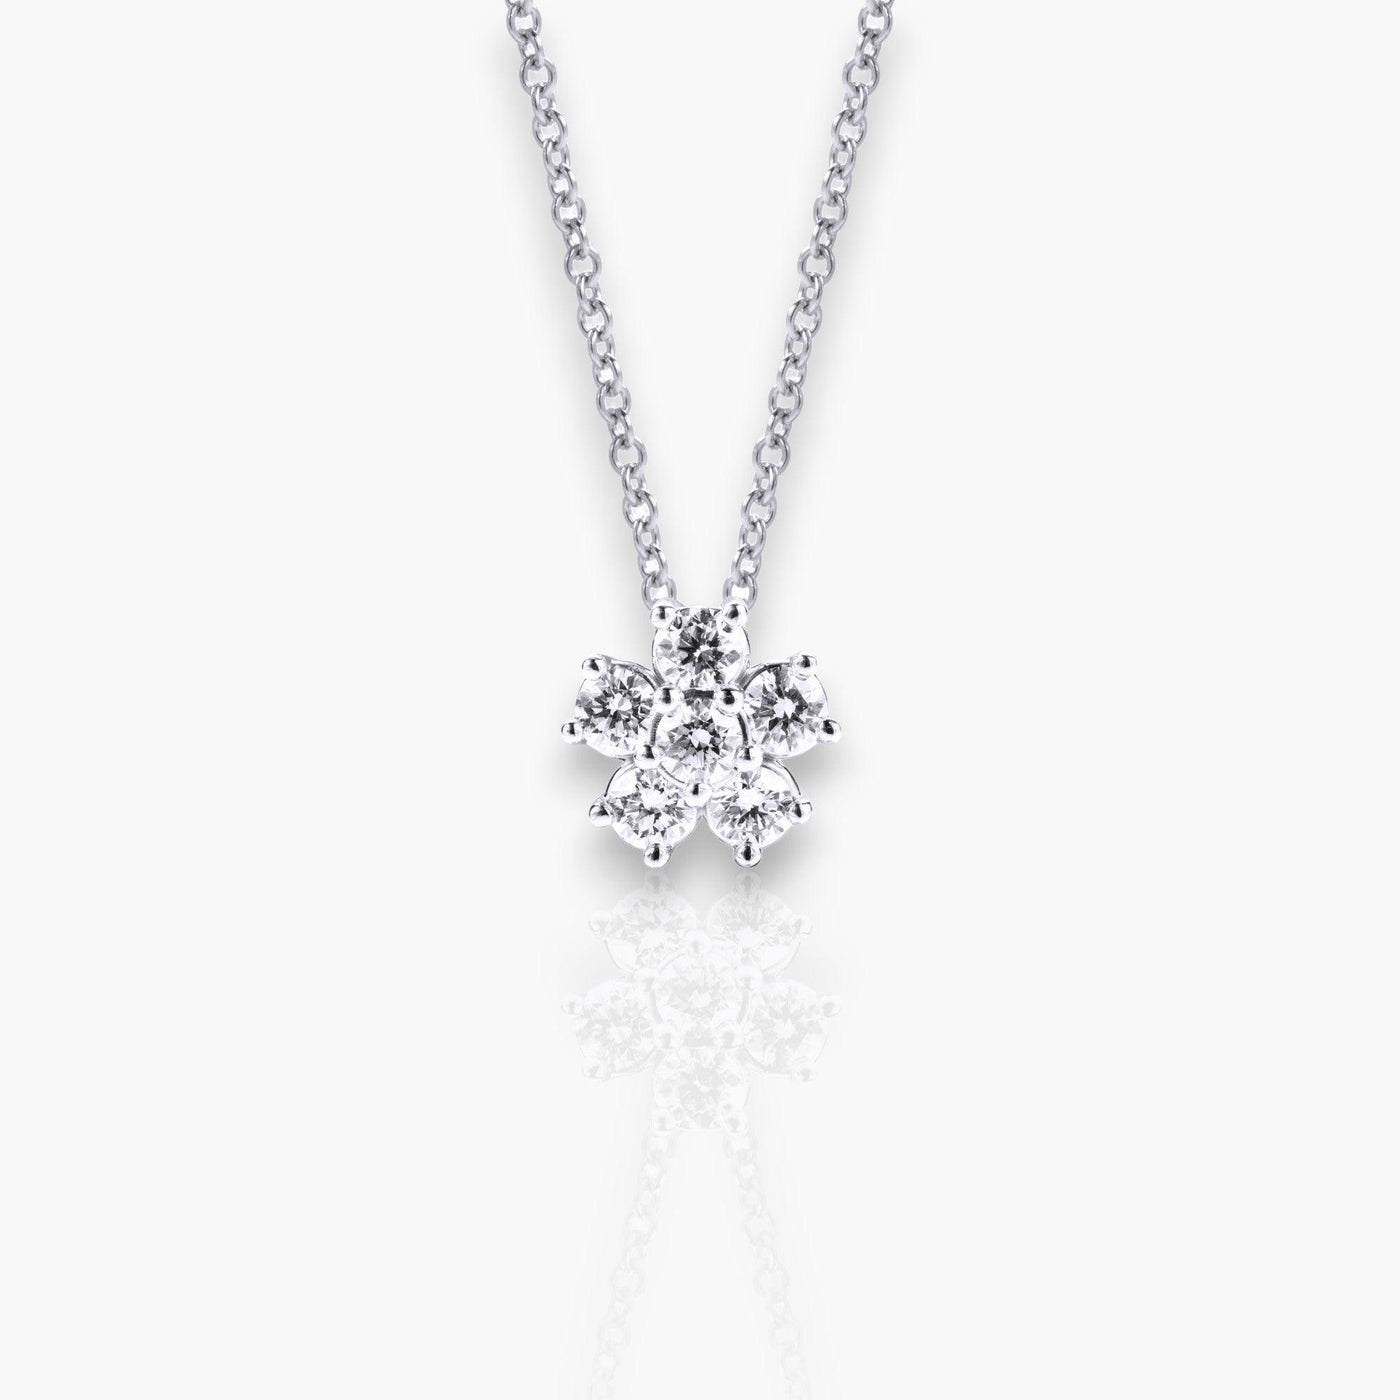 Necklace with Flower in White Gold, 5 Diamonds - Moregola Fine Jewelry